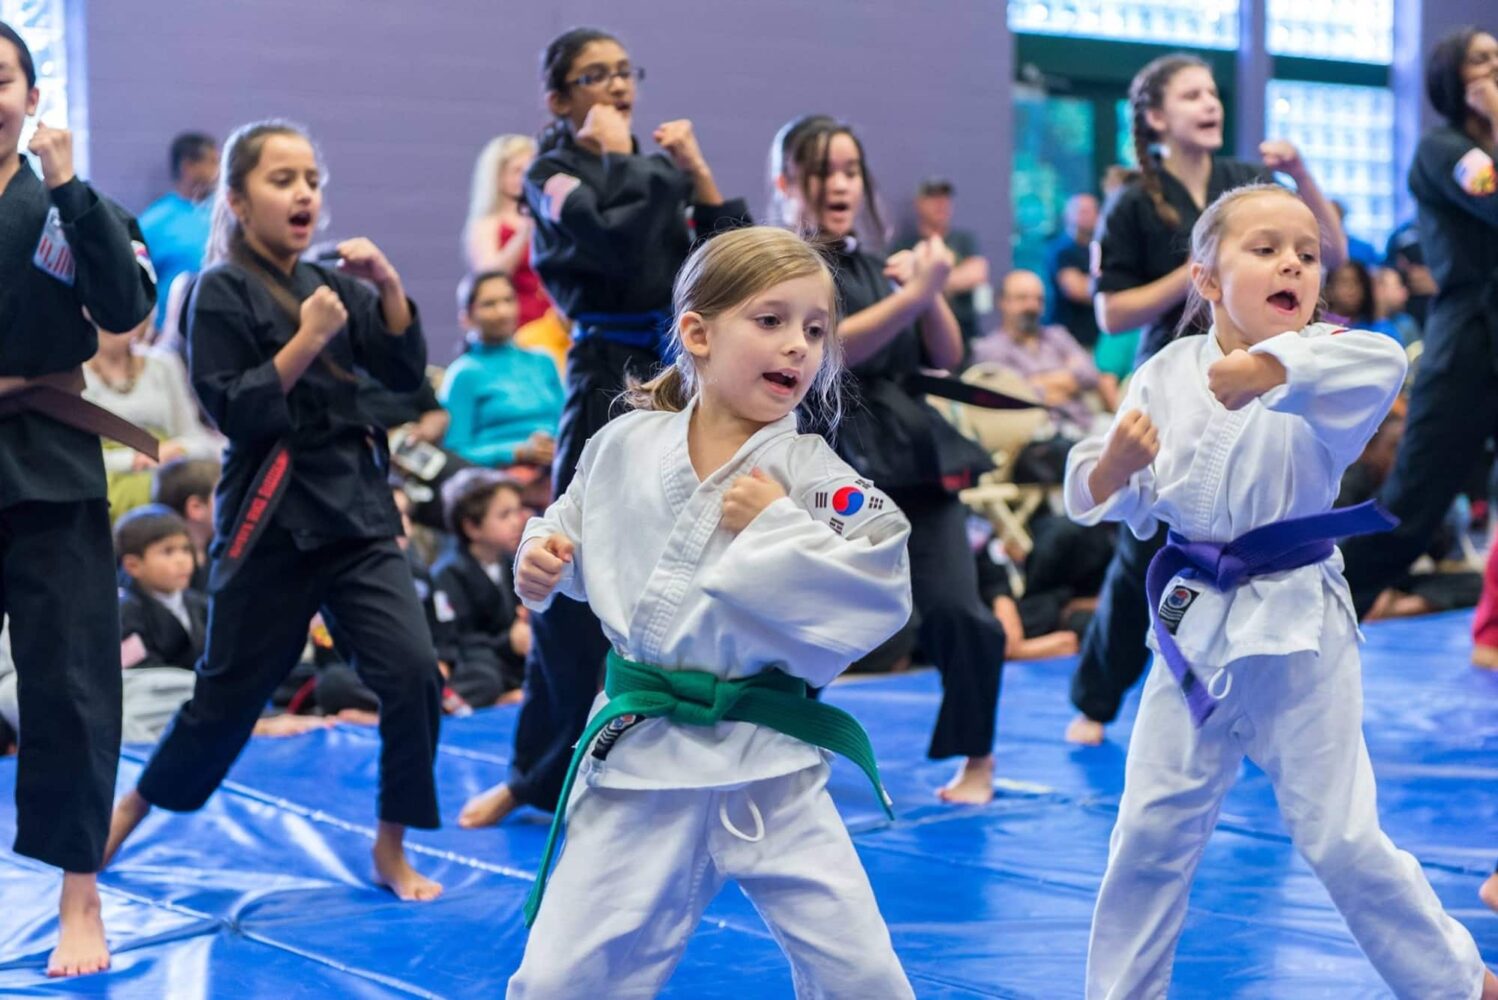 6 Ways Martial Arts Can Build Confidence, Self-Esteem, and Discipline in Your Child